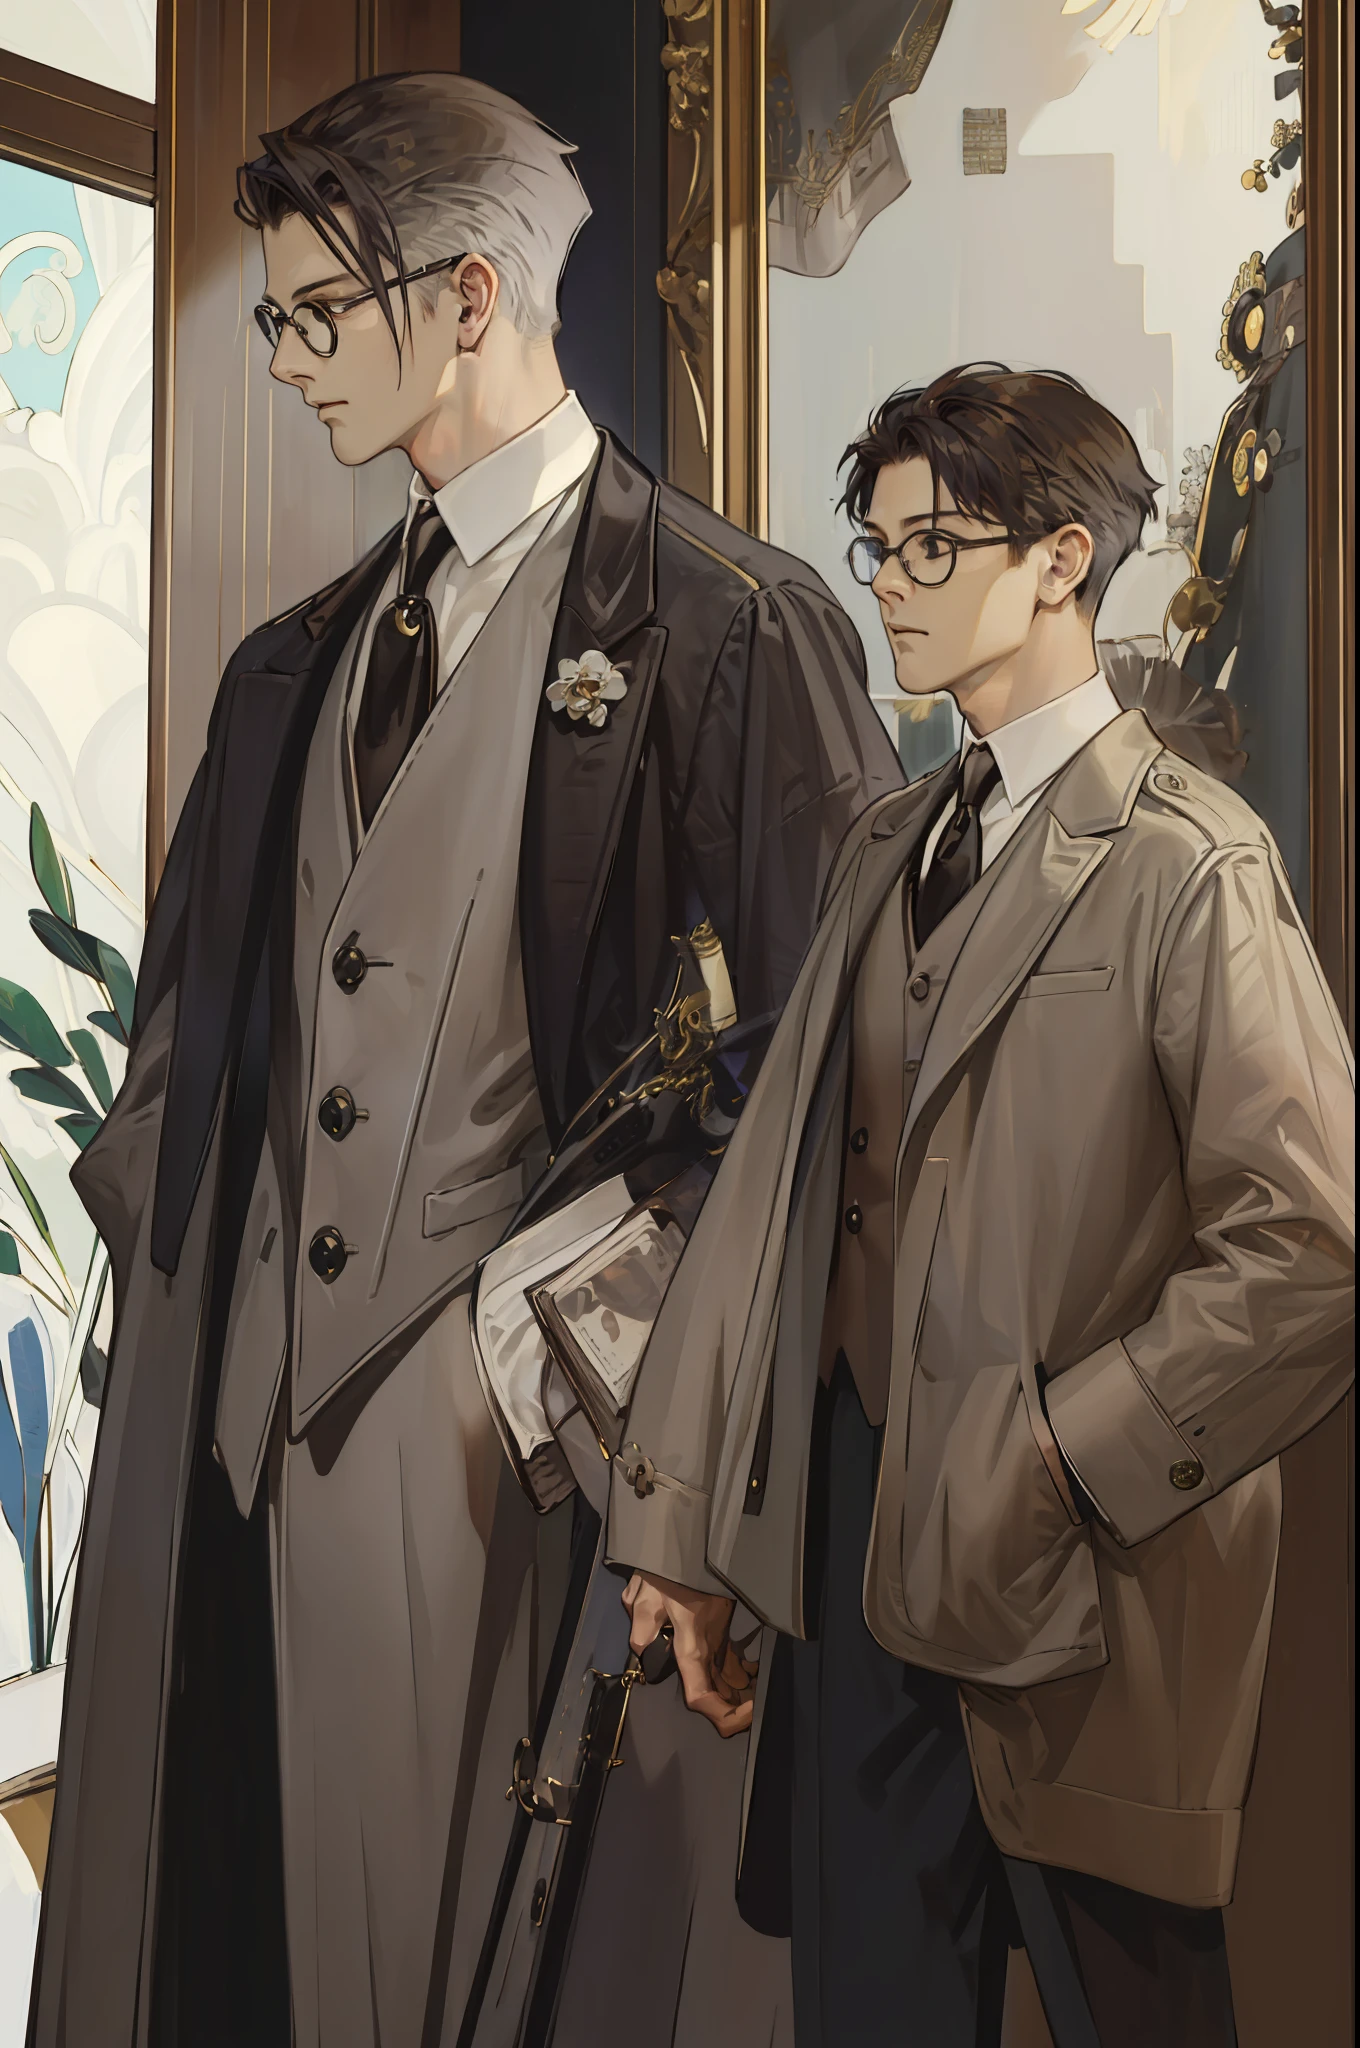 (((absurderes、hight resolution、Ultra-detail)))、(1male people、solo：１.9、Adults、Slender men、Wearing round lens glasses、)、Gentlemanly men、brown haired、Gray eyes、(shorth hair、dishevled hair、long limbodel body type)、tatteredclothing、（（（Large coat。）））long court。Classic fashion、Young adolescents、darkened room、Best light and shadow、oud、Fine dust、concentrating、Reading、Sunlight entering the room、depth of fields、extra detailed face、nerdy、cowboy  shot